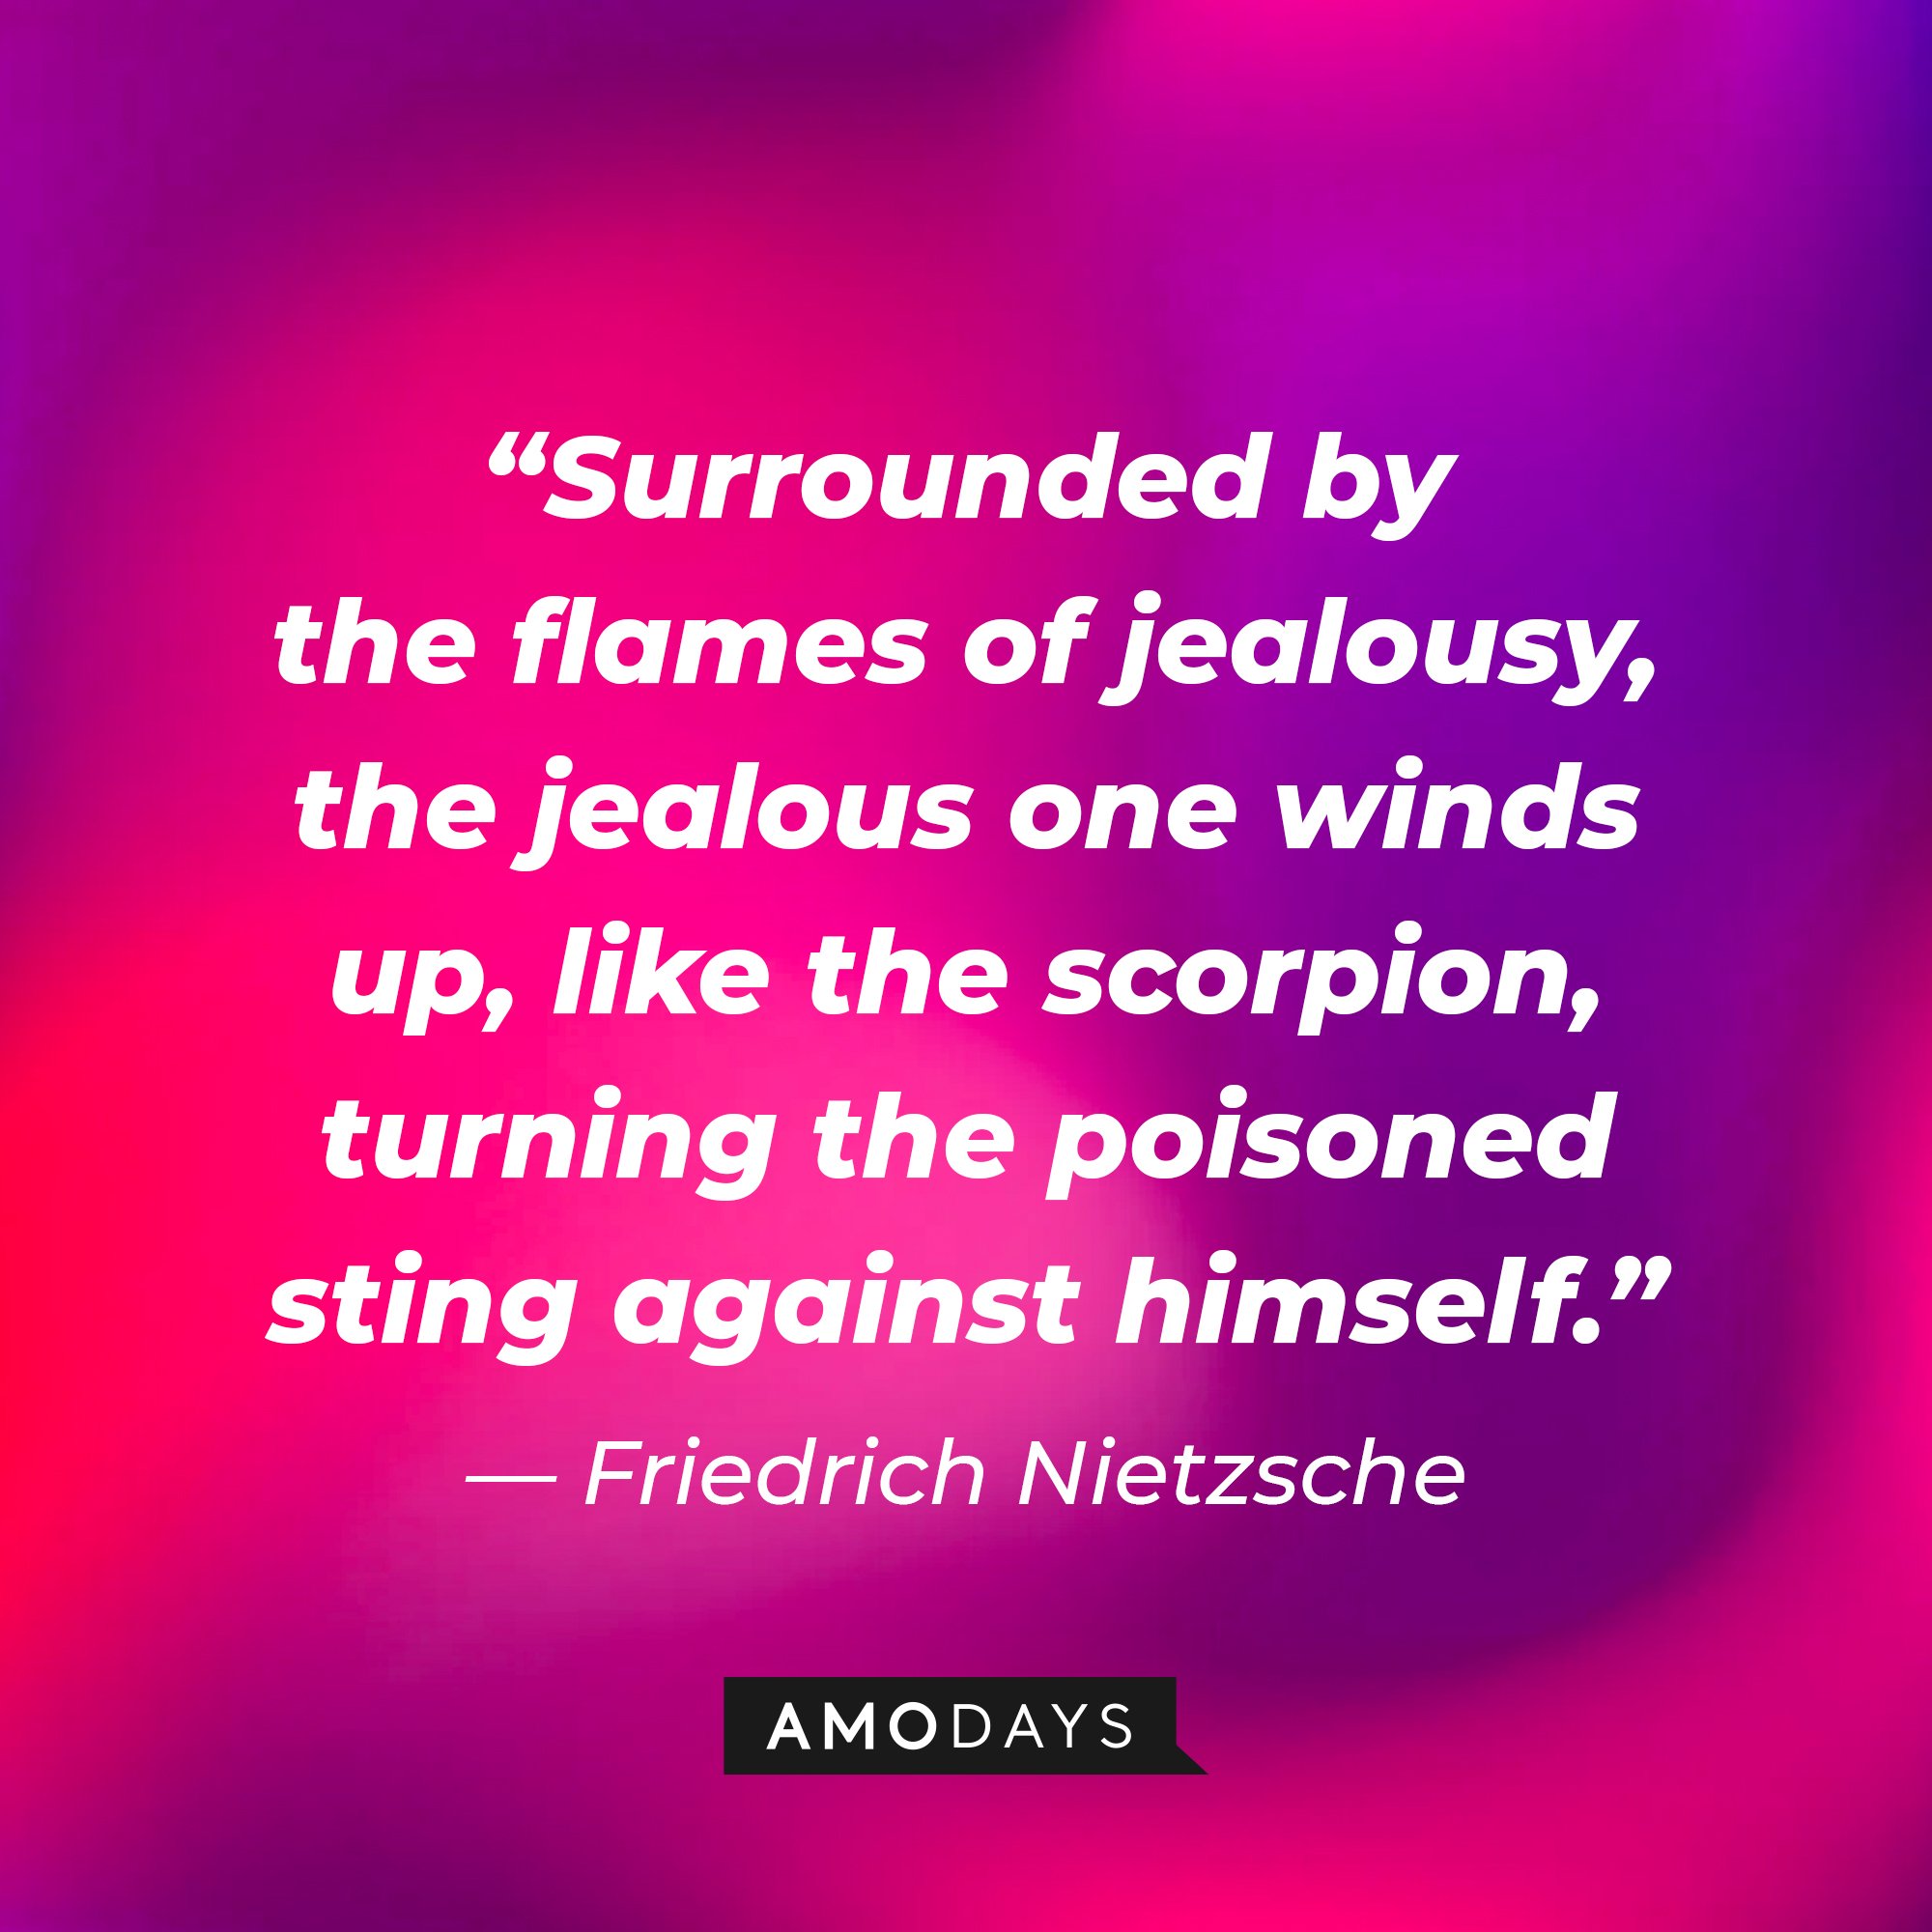  Friedrich Nietzsche's quote: “Surrounded by the flames of jealousy, the jealous one winds up, like the scorpion, turning the poisoned sting against himself.” | Image: AmoDays